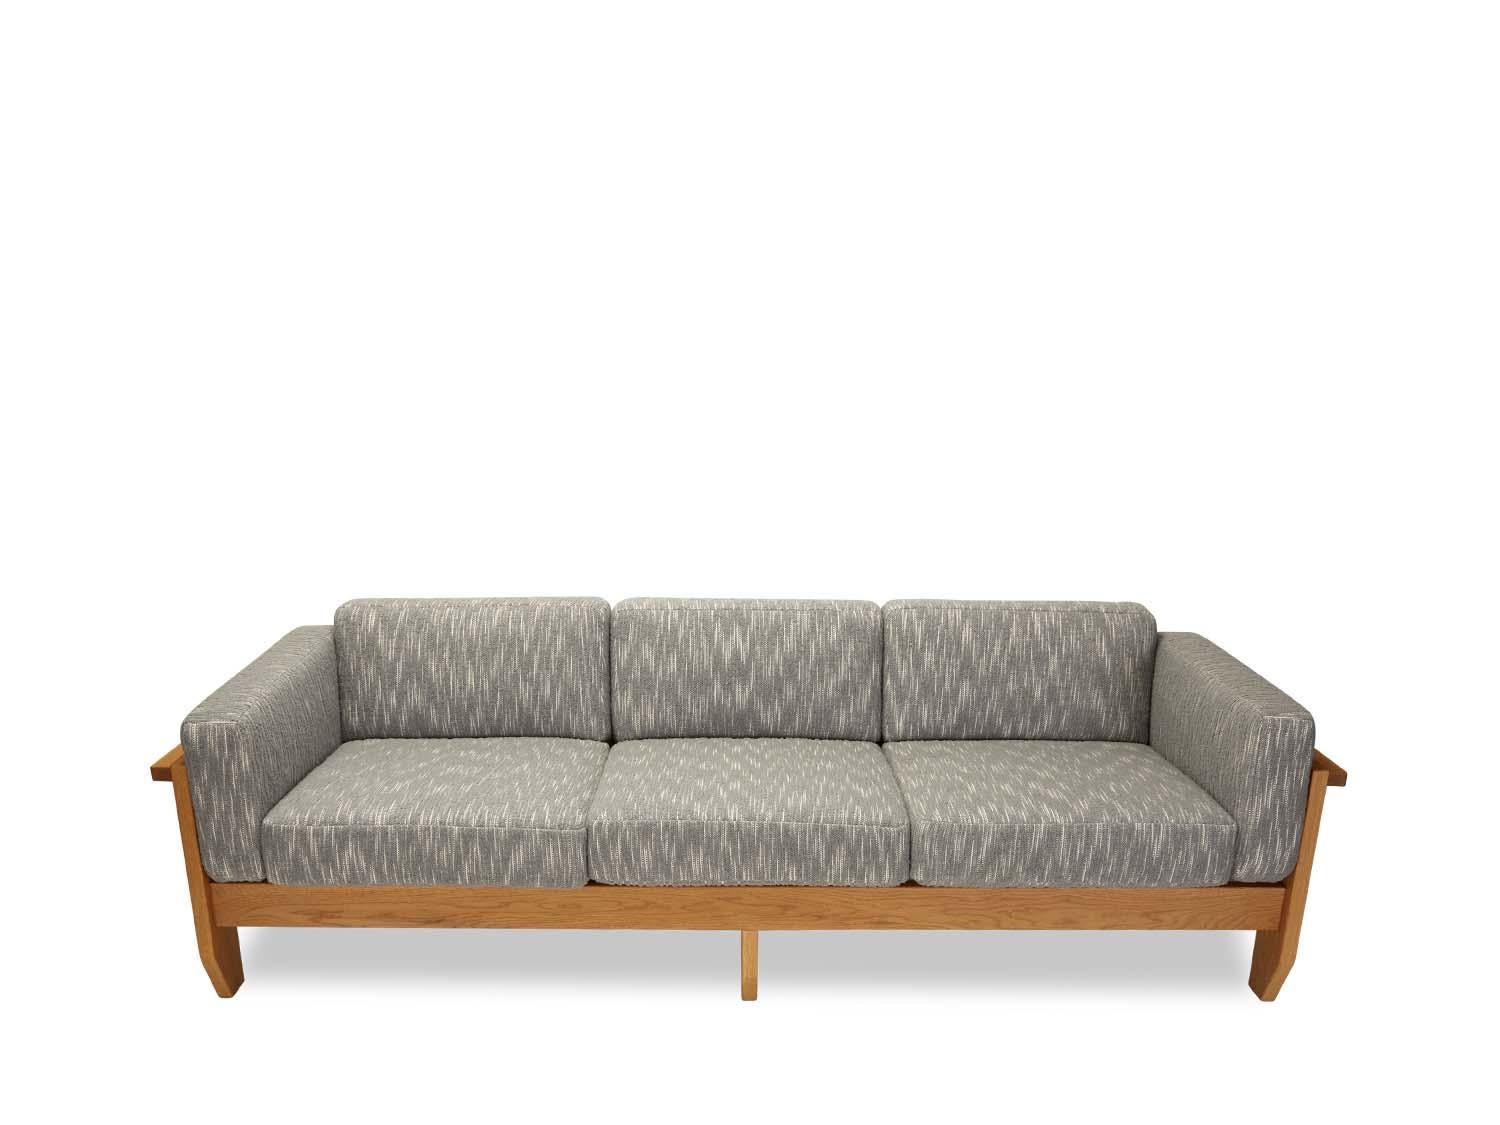 The Portola sofa features a handcrafted solid walnut or oak frame with loose seat and back cushions.

The Lawson-Fenning Collection is designed and handmade in Los Angeles, California. Reach out to discover what options are currently in stock.

 